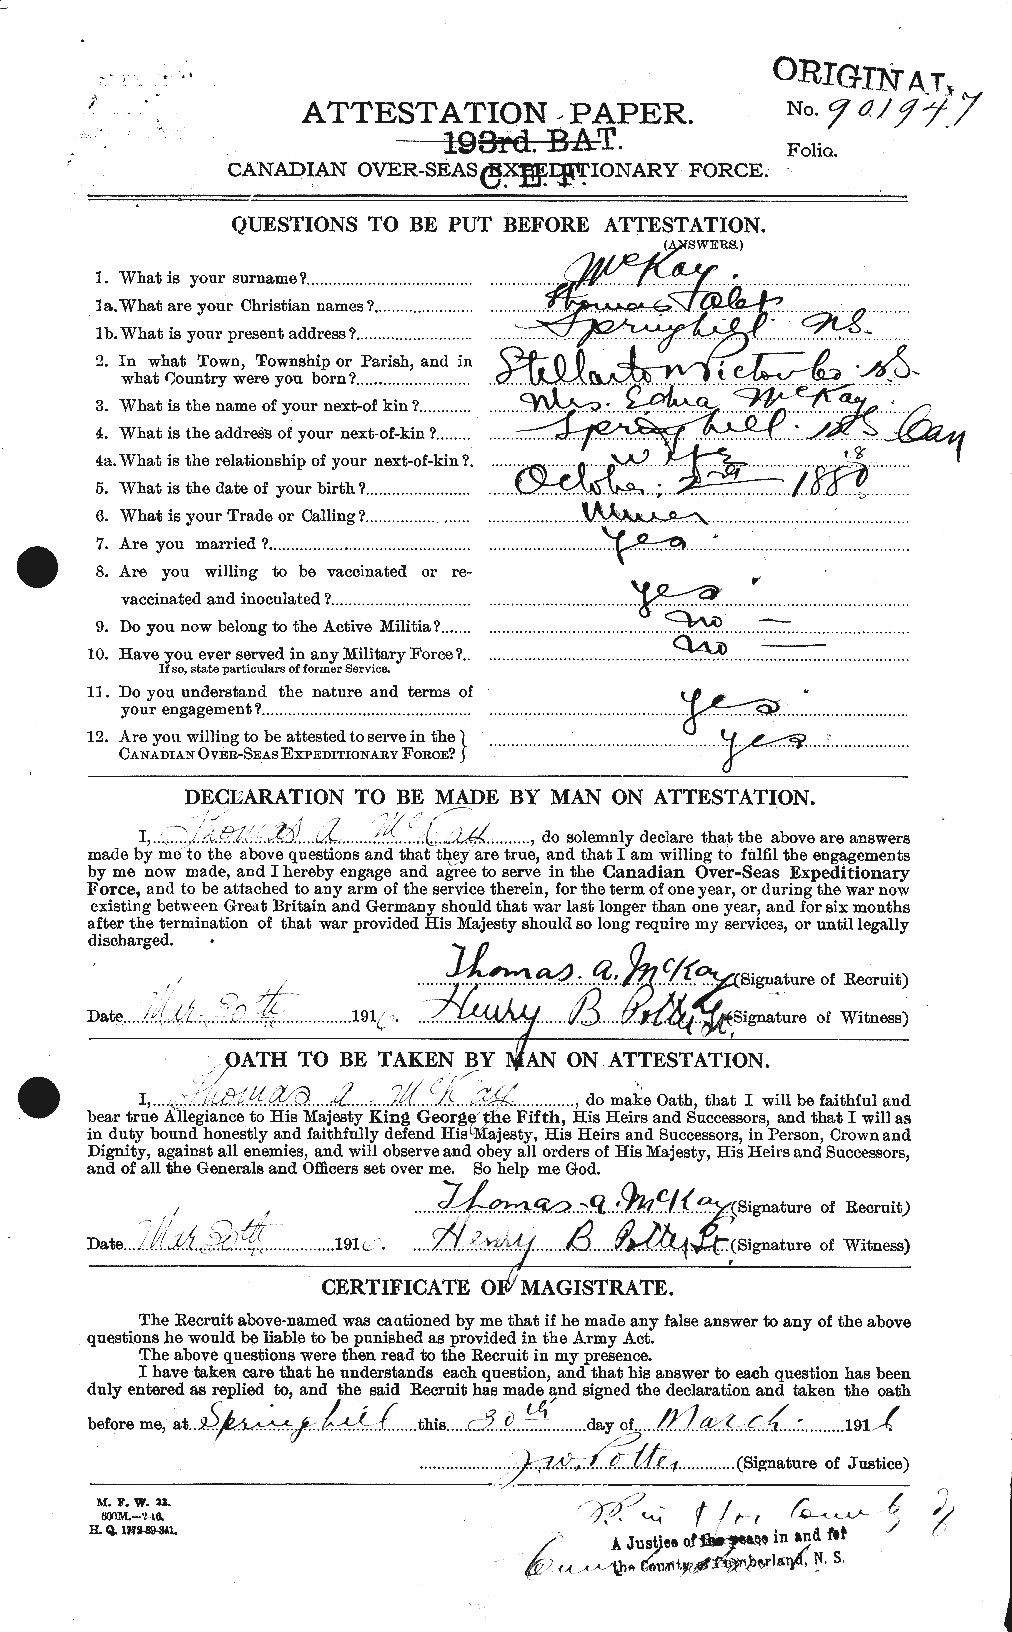 Personnel Records of the First World War - CEF 530169a